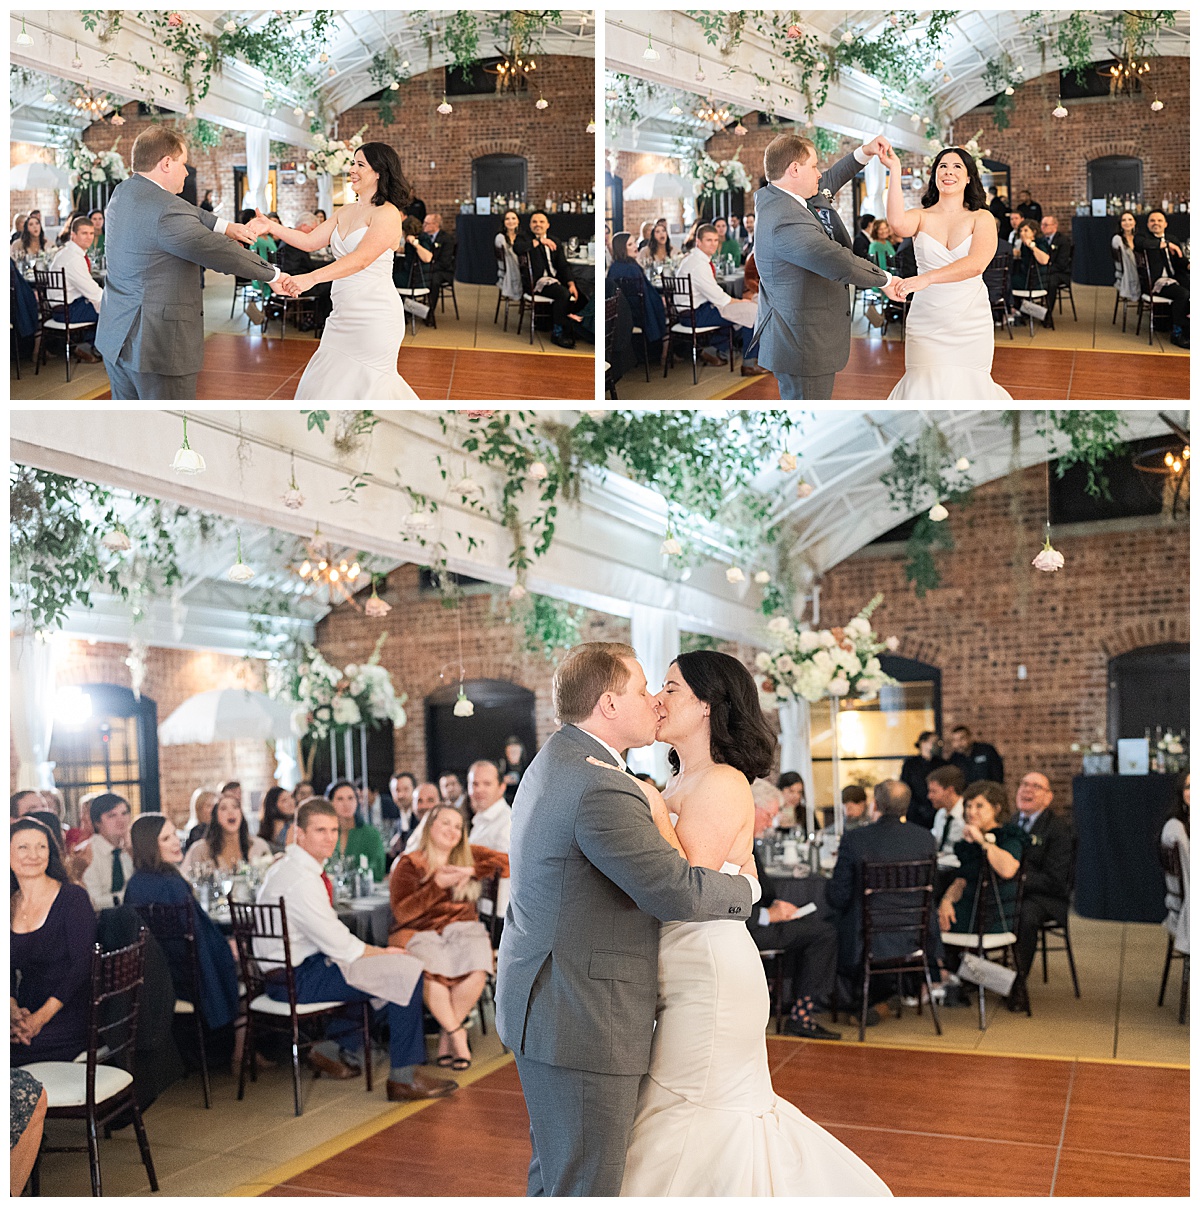 Stunning first dance at The Sam Houston Hotel